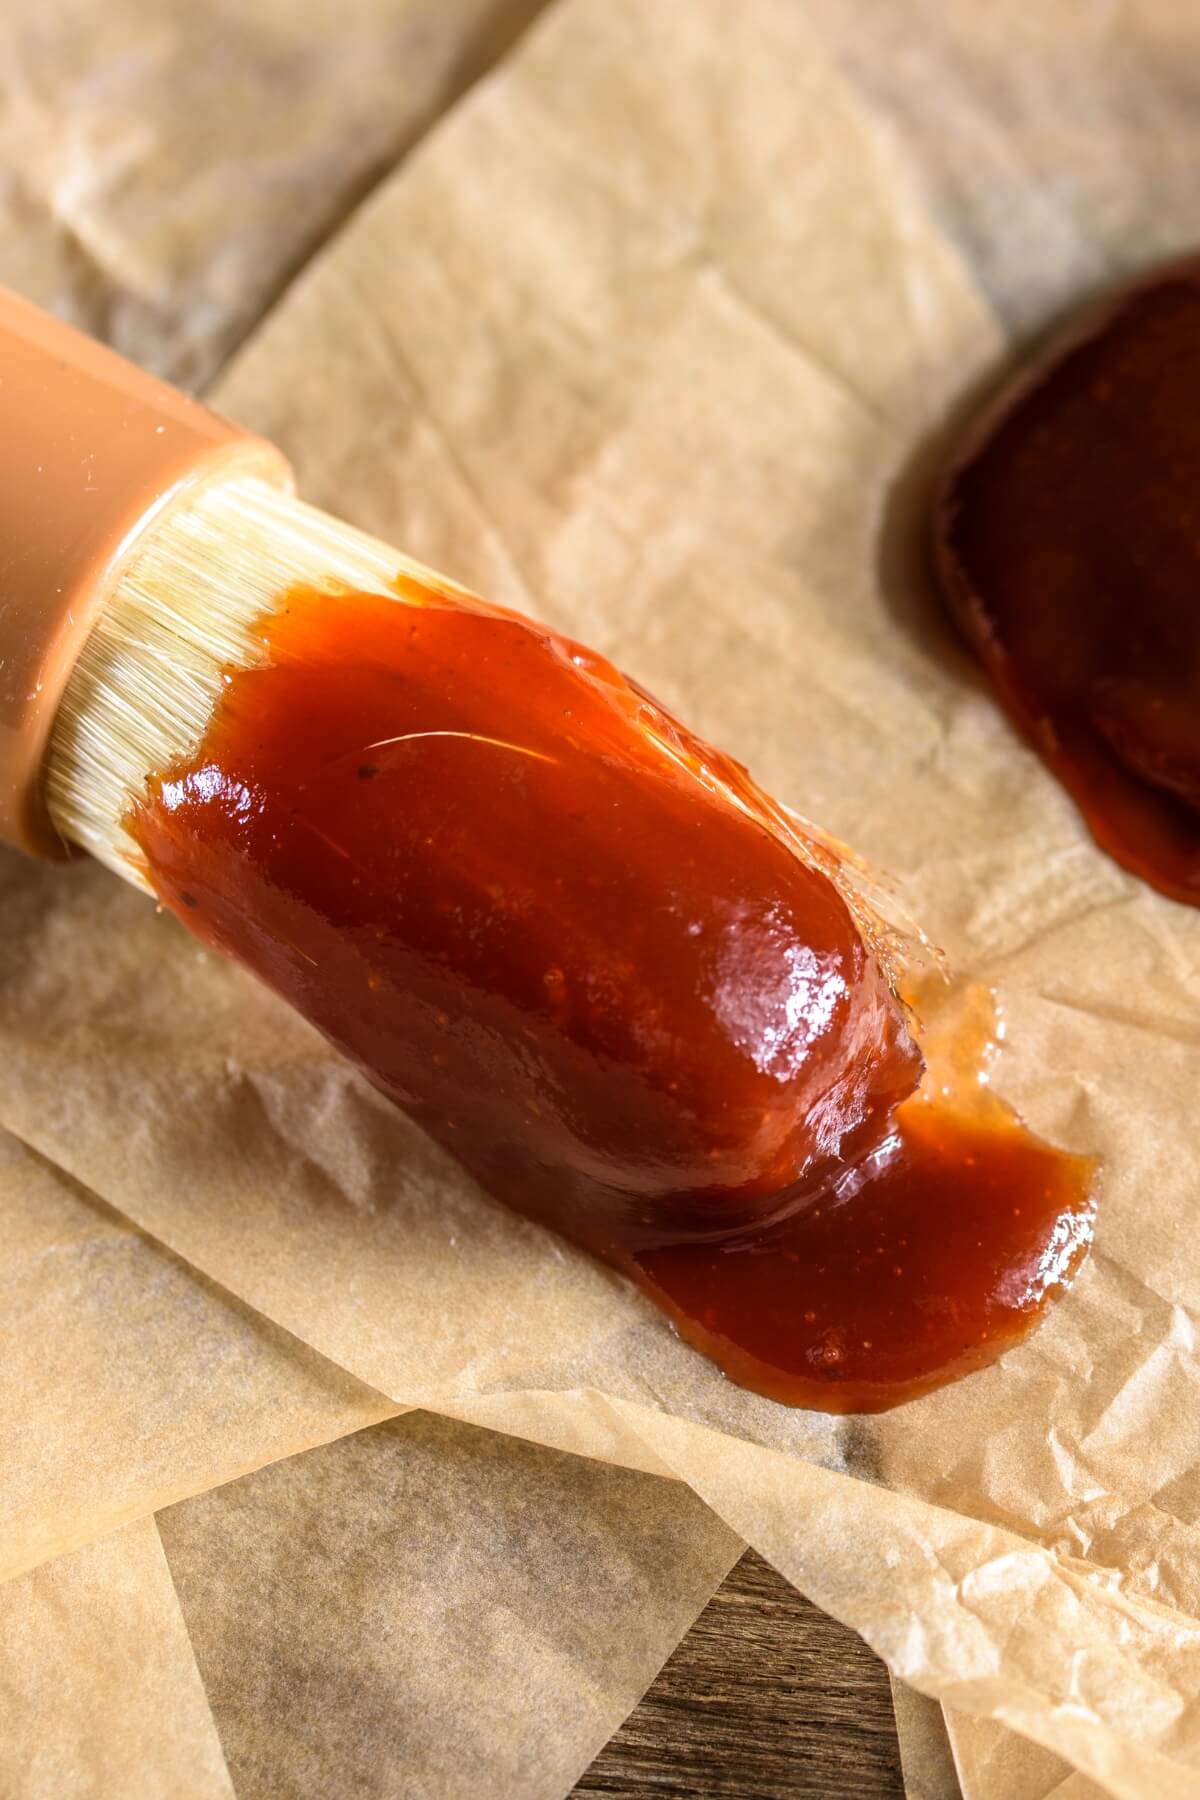 A brush with barbeque sauce on it on a piece of parchment paper.